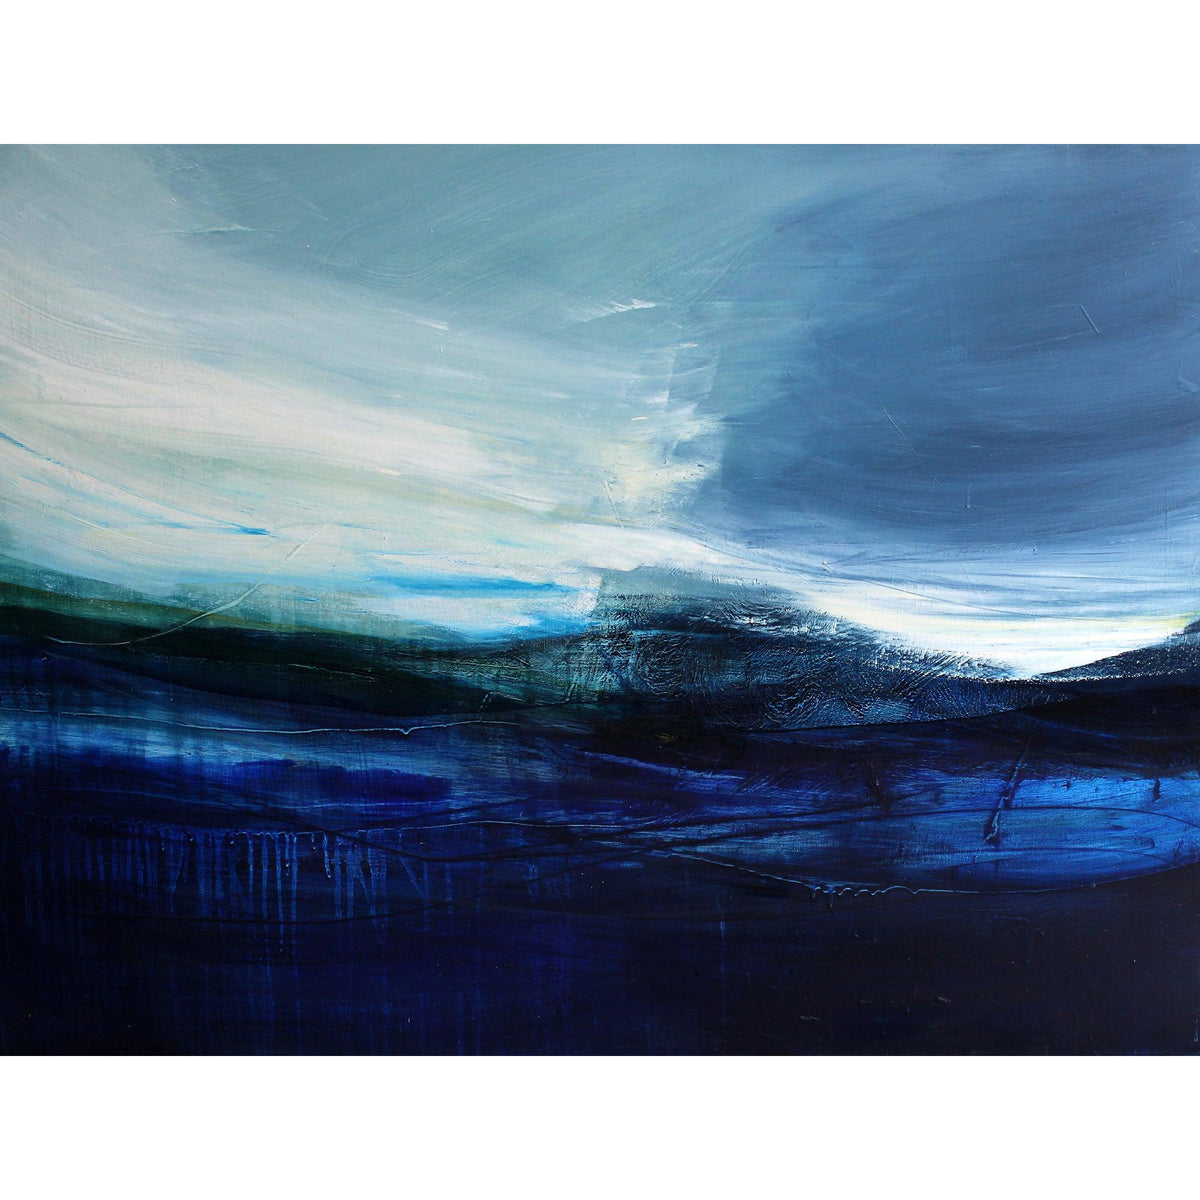 &#39;Riders of the sea&#39; oil original by Justine Lois Thorpe, available at Padstow Gallery, Cornwall